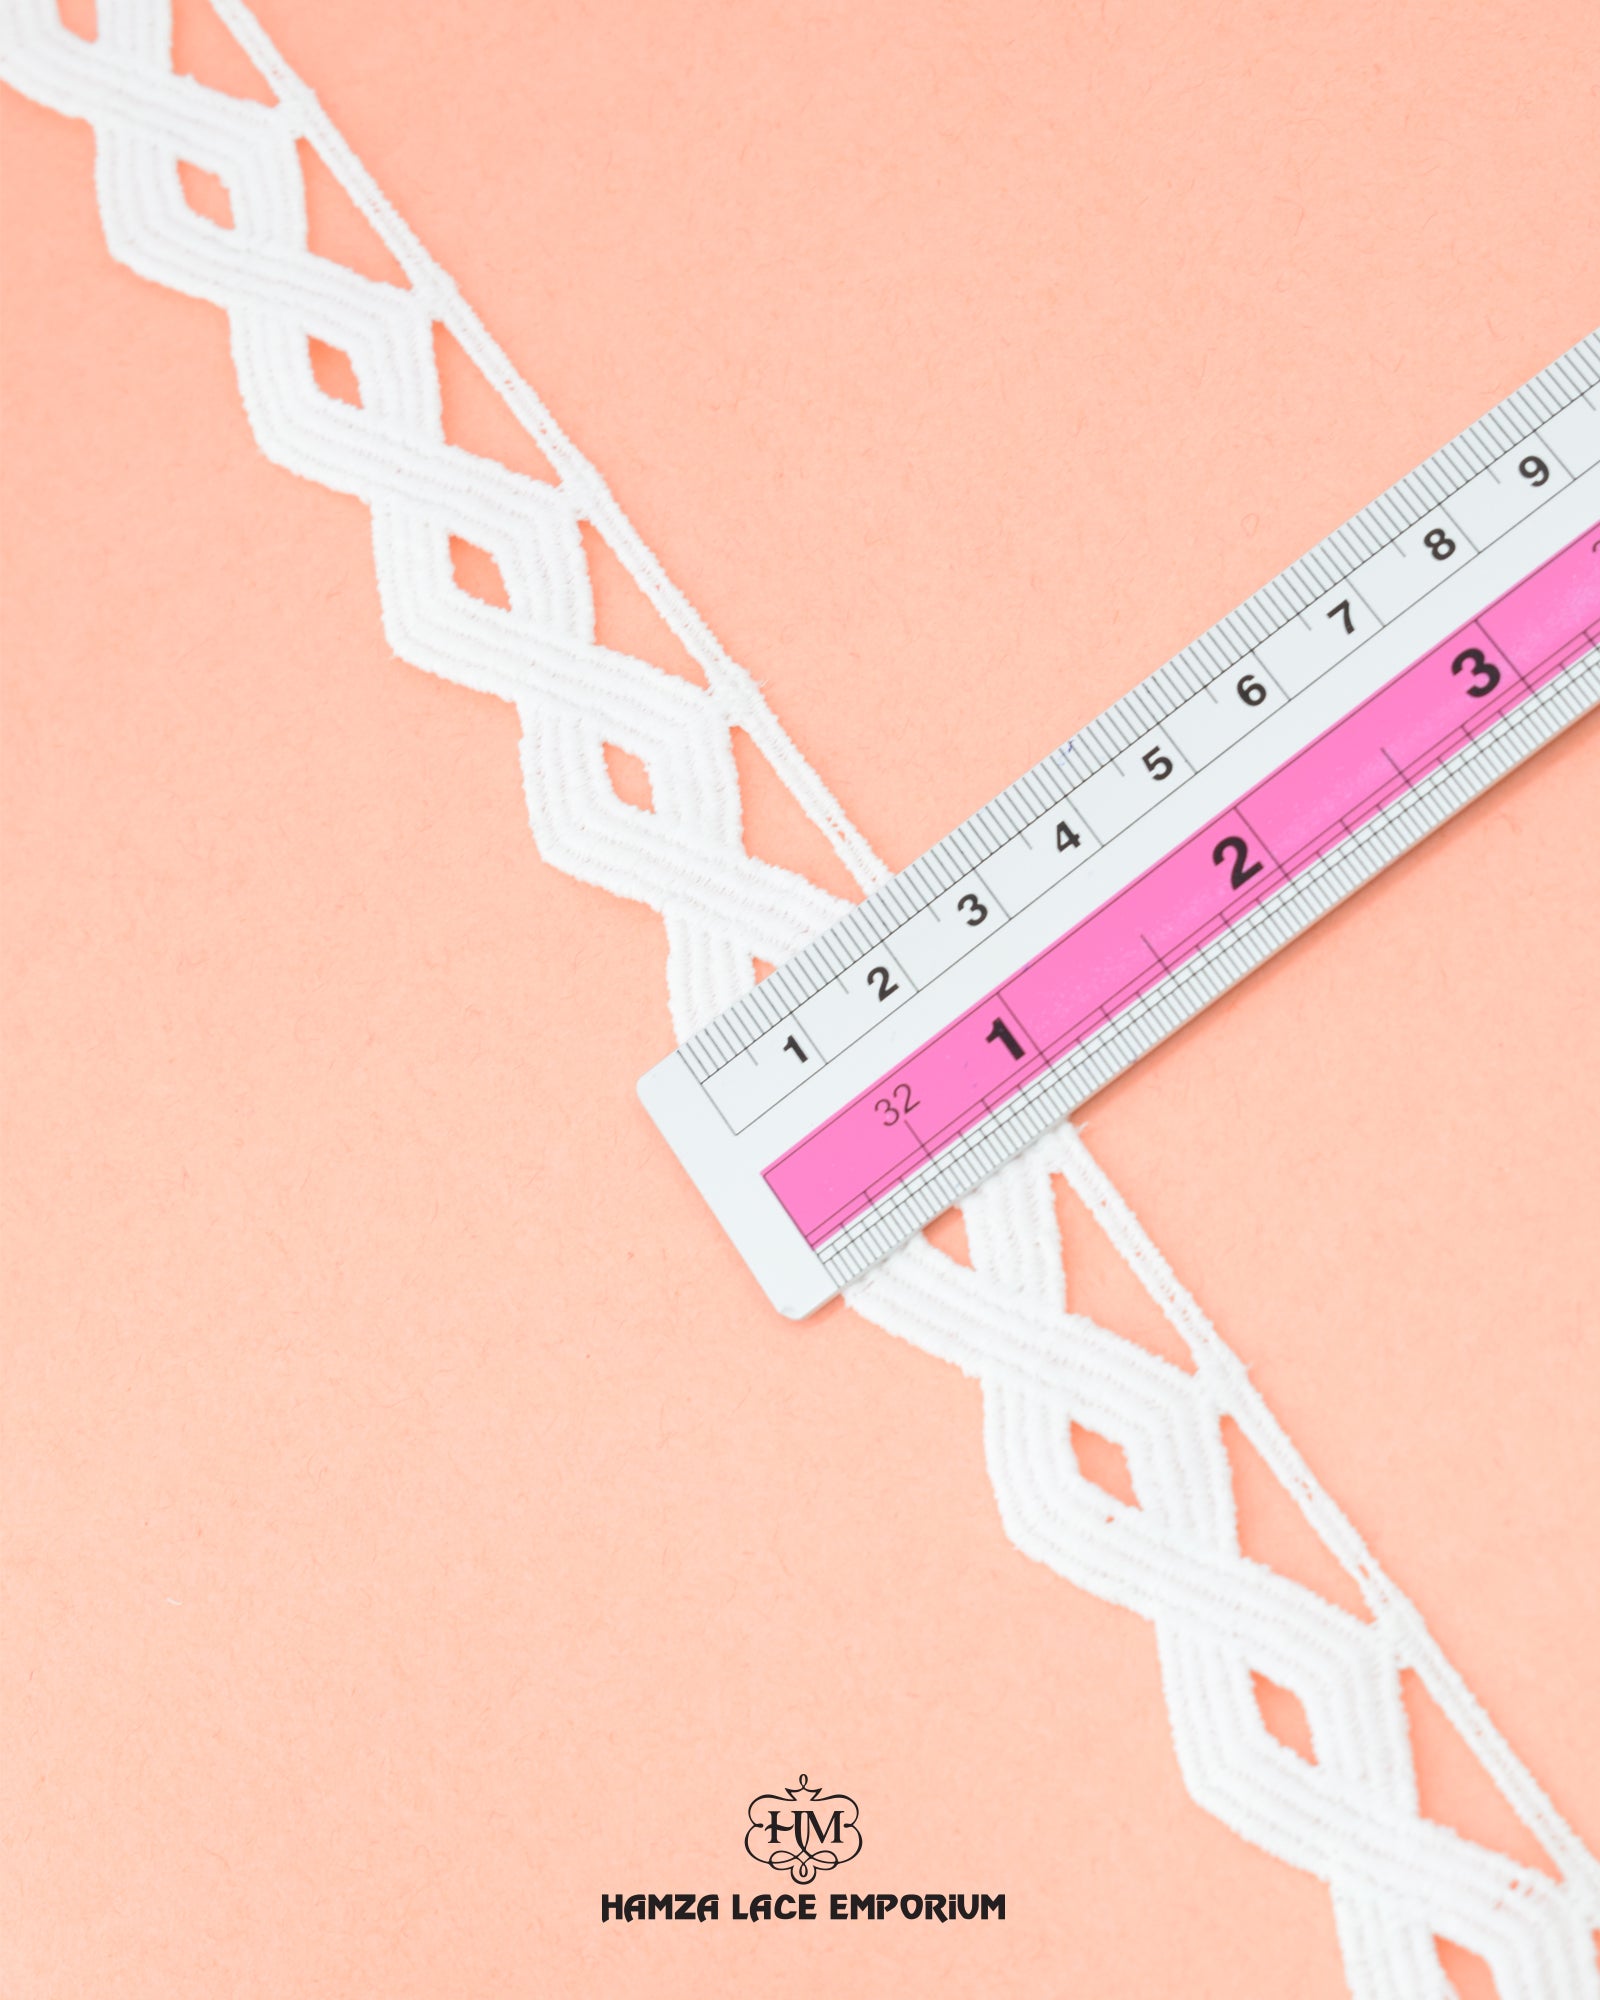 Size of the 'Edging Lace 2120' is given as 1 inch with the help of a ruler